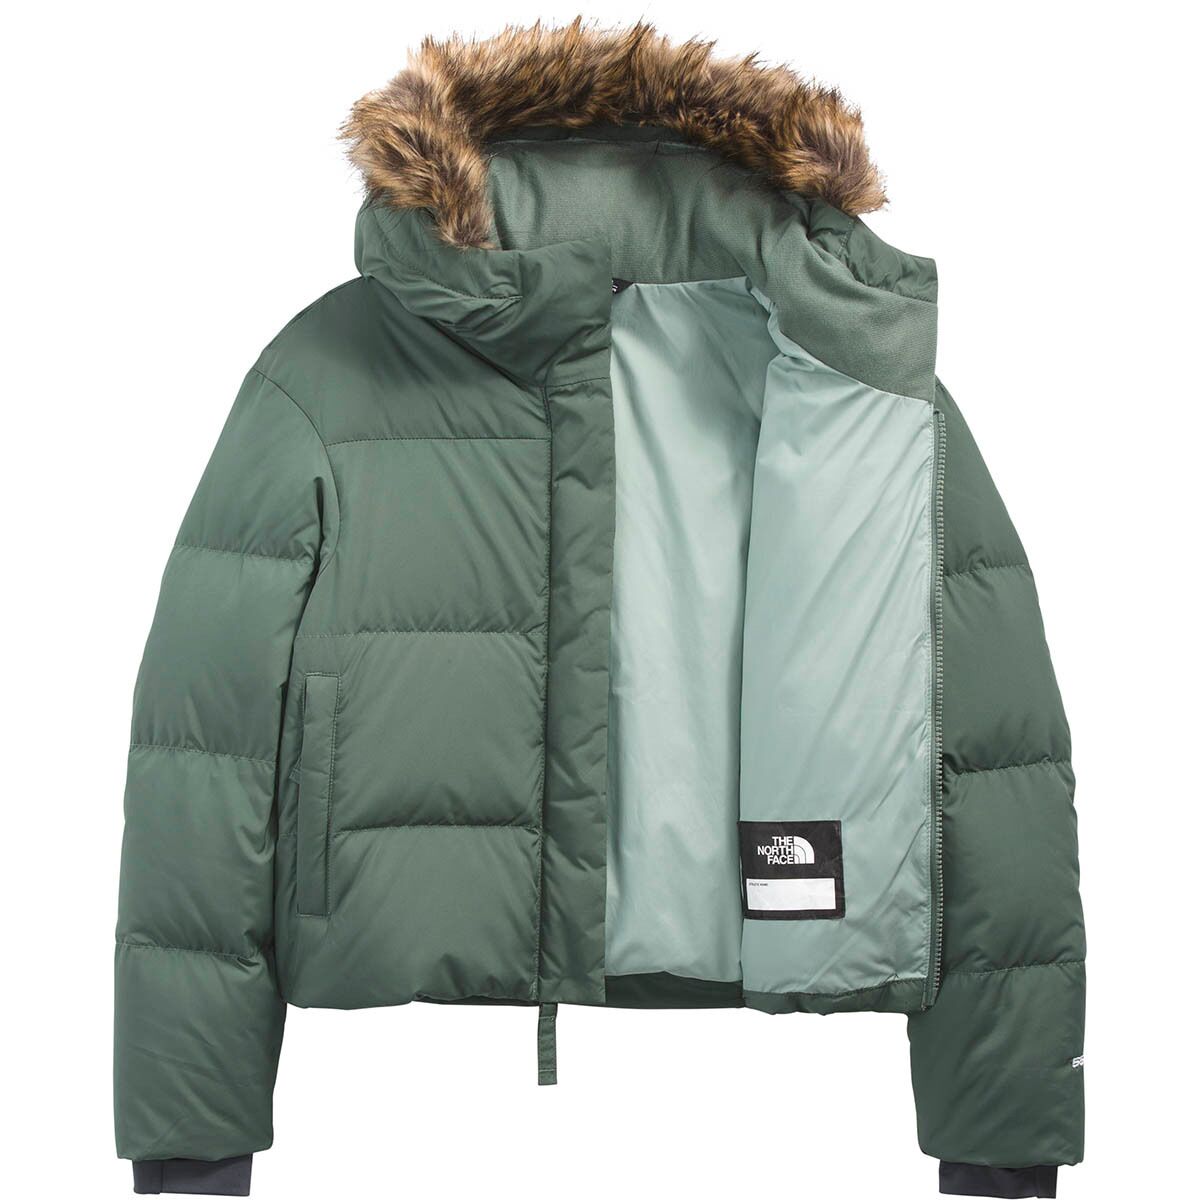 The North Face Dealio City Jacket - Girls' - Kids